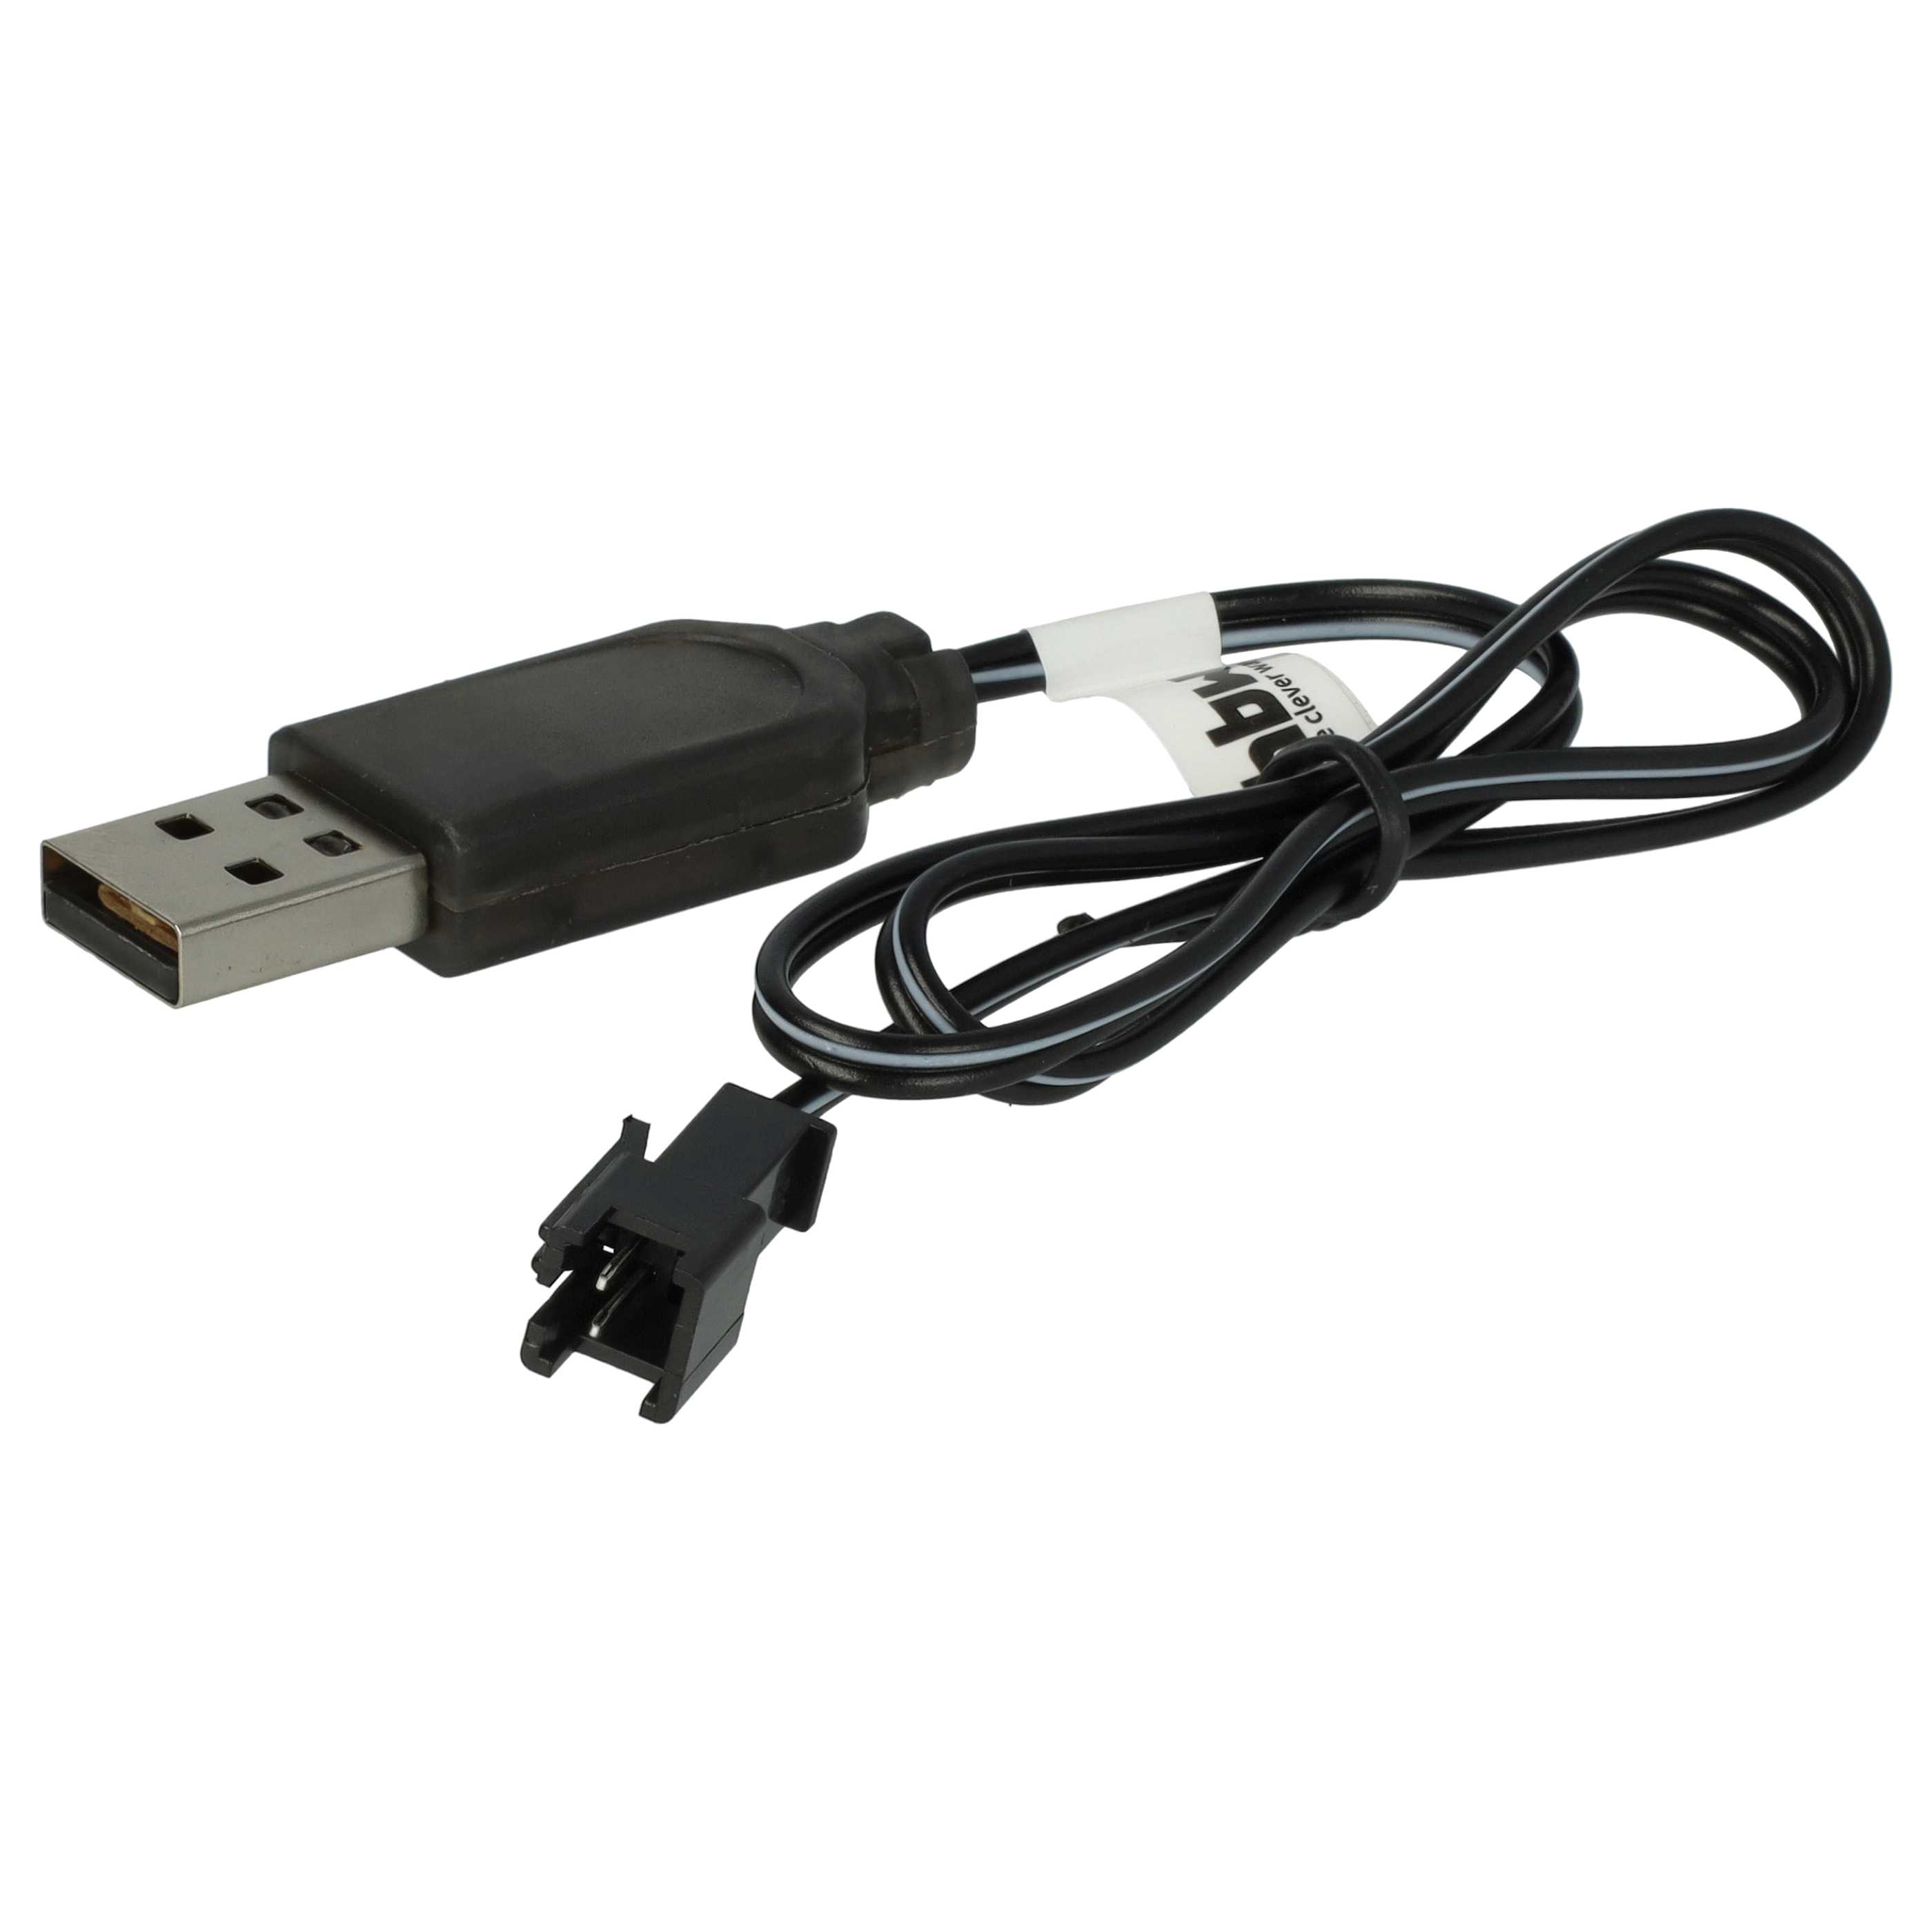 USB Charging Cable suitable for RC Batteries with SM-2P Connector, RC Model Making Battery Packs - 60 cm 3.6 V